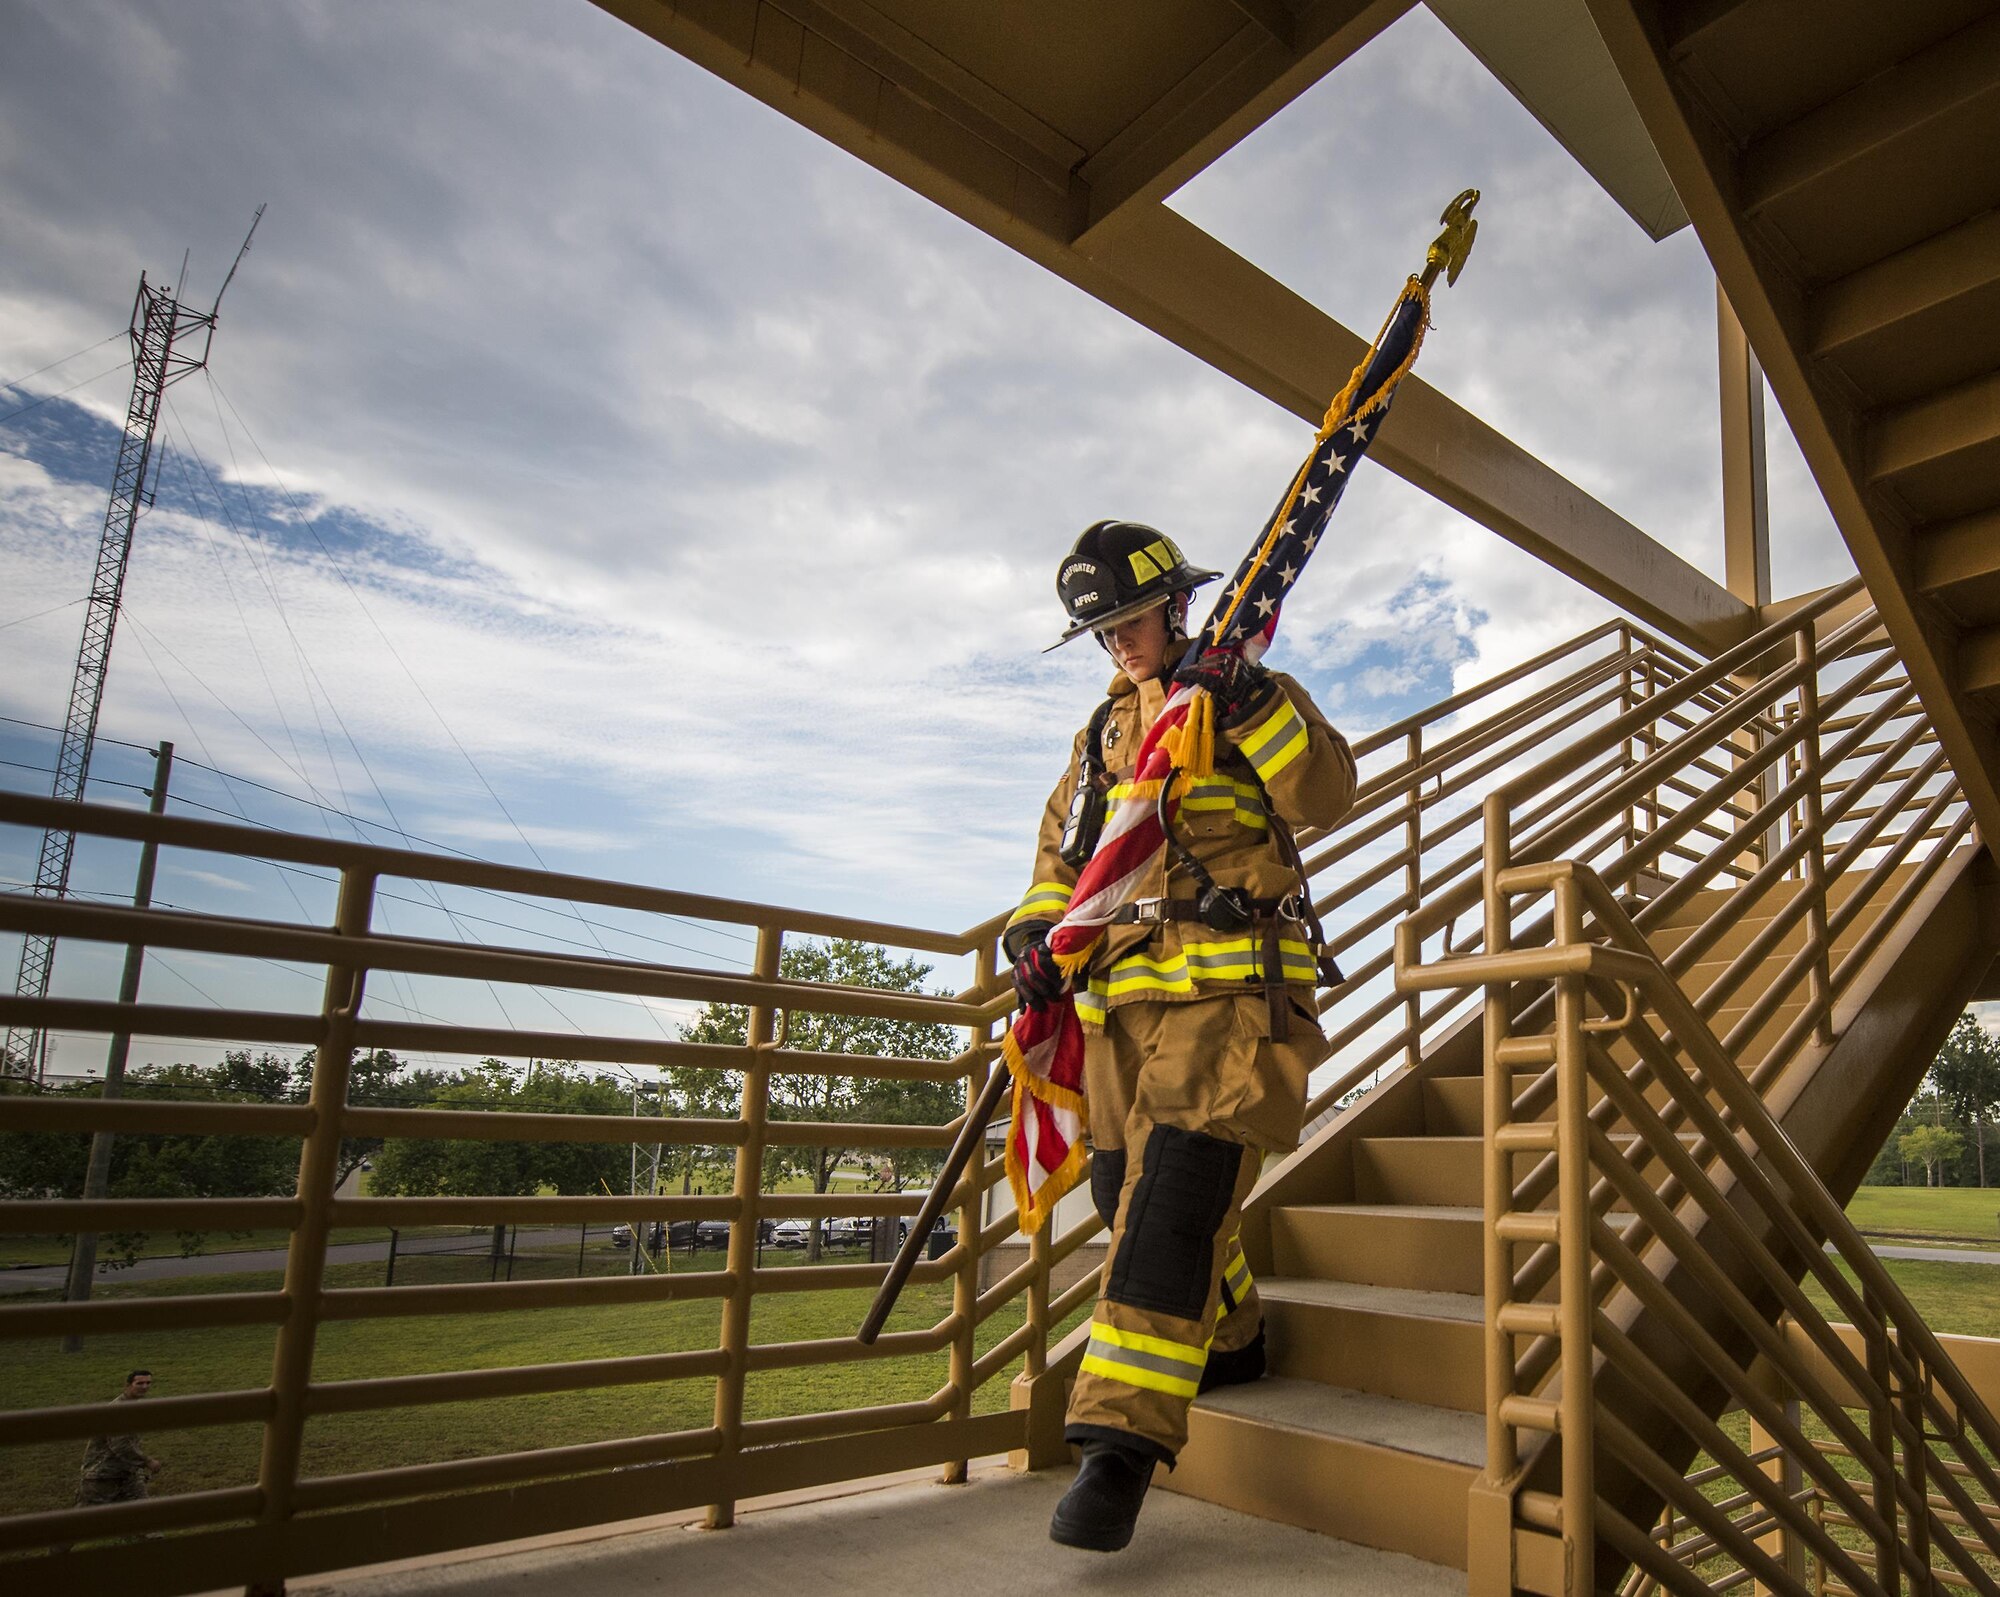 Airman Virginia Davis, 919th Special Operations Civil Engineer Squadron, carries an American flag down a flight of stairs while wearing her firefighter gear during a 9/11 Memorial Stair Climb event at Duke Field, Fla., Sept. 11.  The 24-hour climb began at 8:46 a.m. Sept. 10 with the 919th Special Operations Wing commander walking the flag up the outside stairwell of the base’s billeting facility.  Wing Airmen took turns walking the flag up and down the stairwell the entire day until it was delivered to a firefighter and security forces color guard at 8:46 a.m. the next morning for a 9/11 Remembrance ceremony.  More than 115 Airmen carried the flag throughout the day and night for a total of more than 207,000 steps.  (U.S. Air Force photo/Tech. Sgt. Sam King)